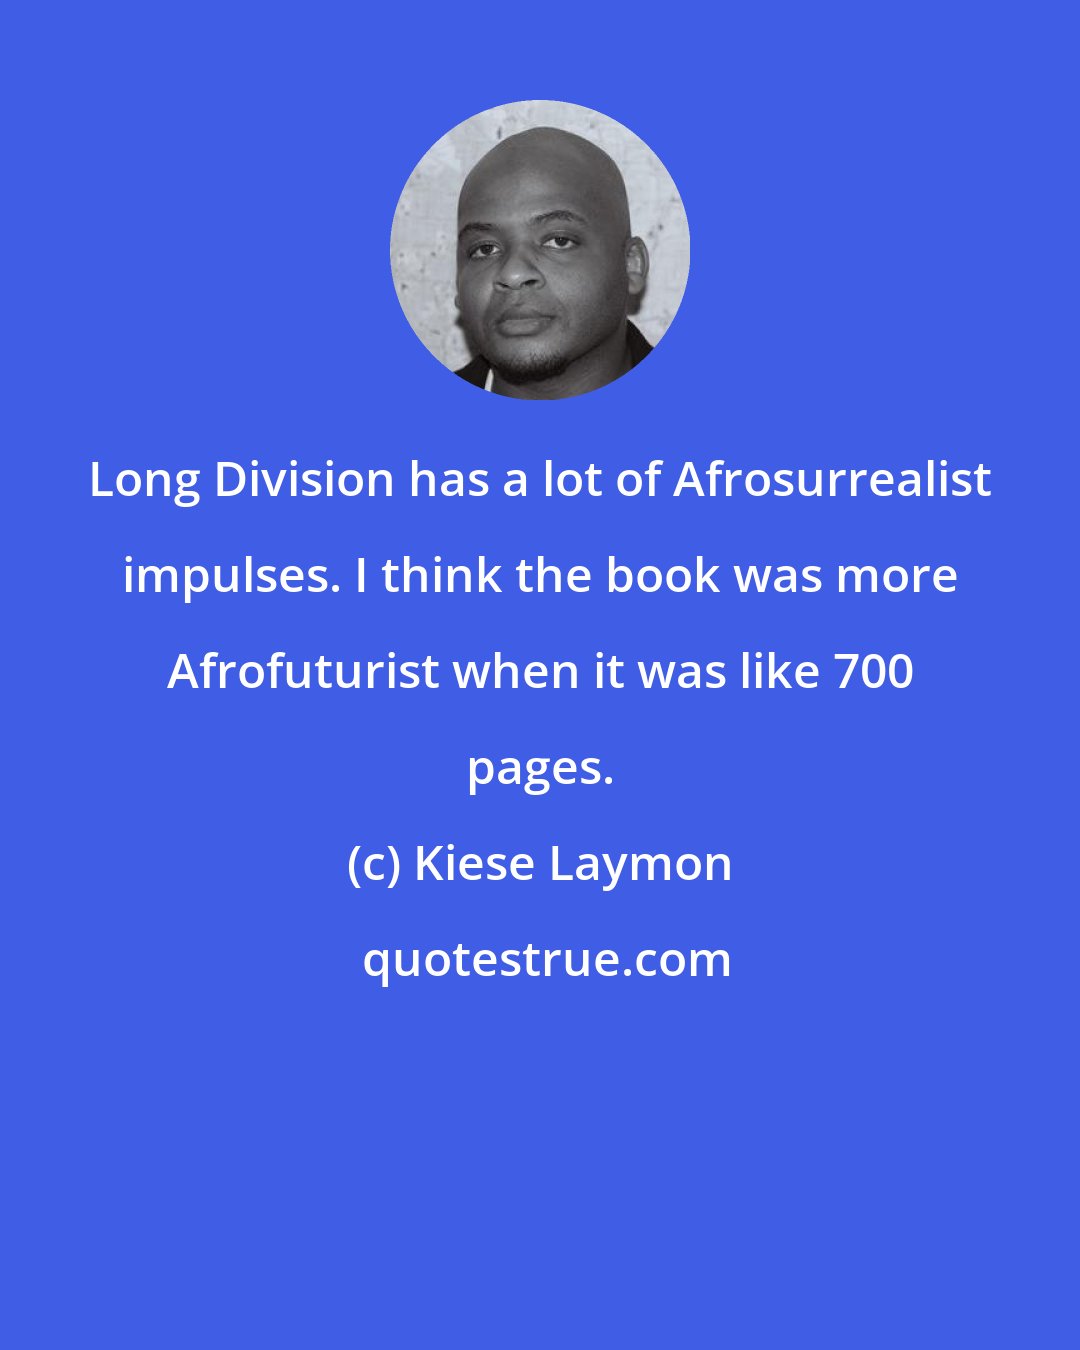 Kiese Laymon: Long Division has a lot of Afrosurrealist impulses. I think the book was more Afrofuturist when it was like 700 pages.